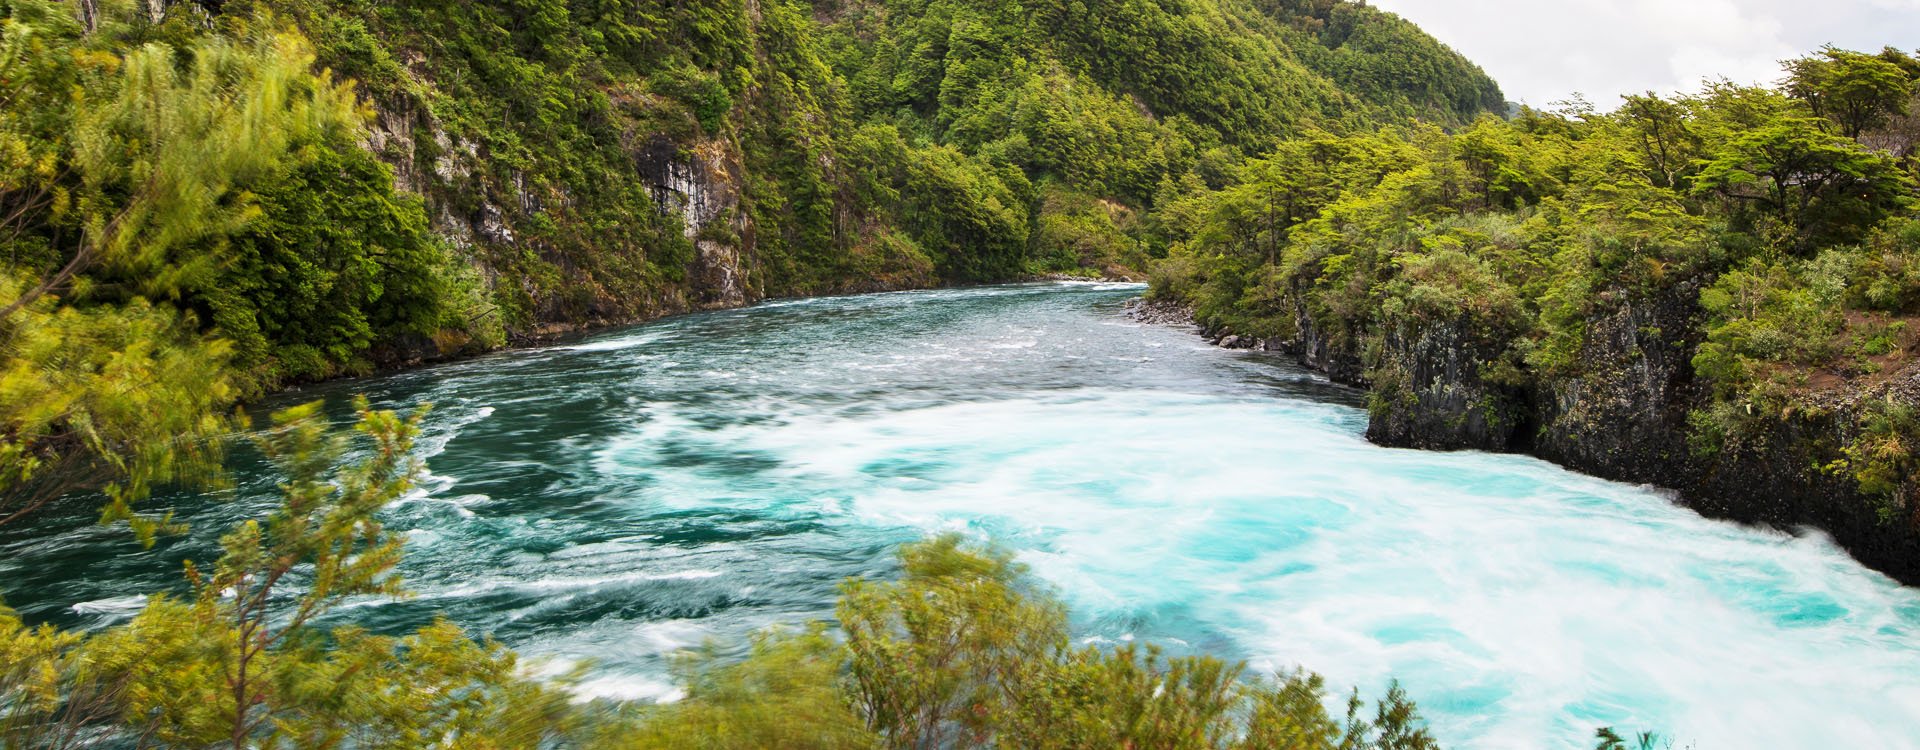 Petrohue River is a Chilean river located in the Los Lagos Region of Chile. At its origin are the Petrohue Waterfalls